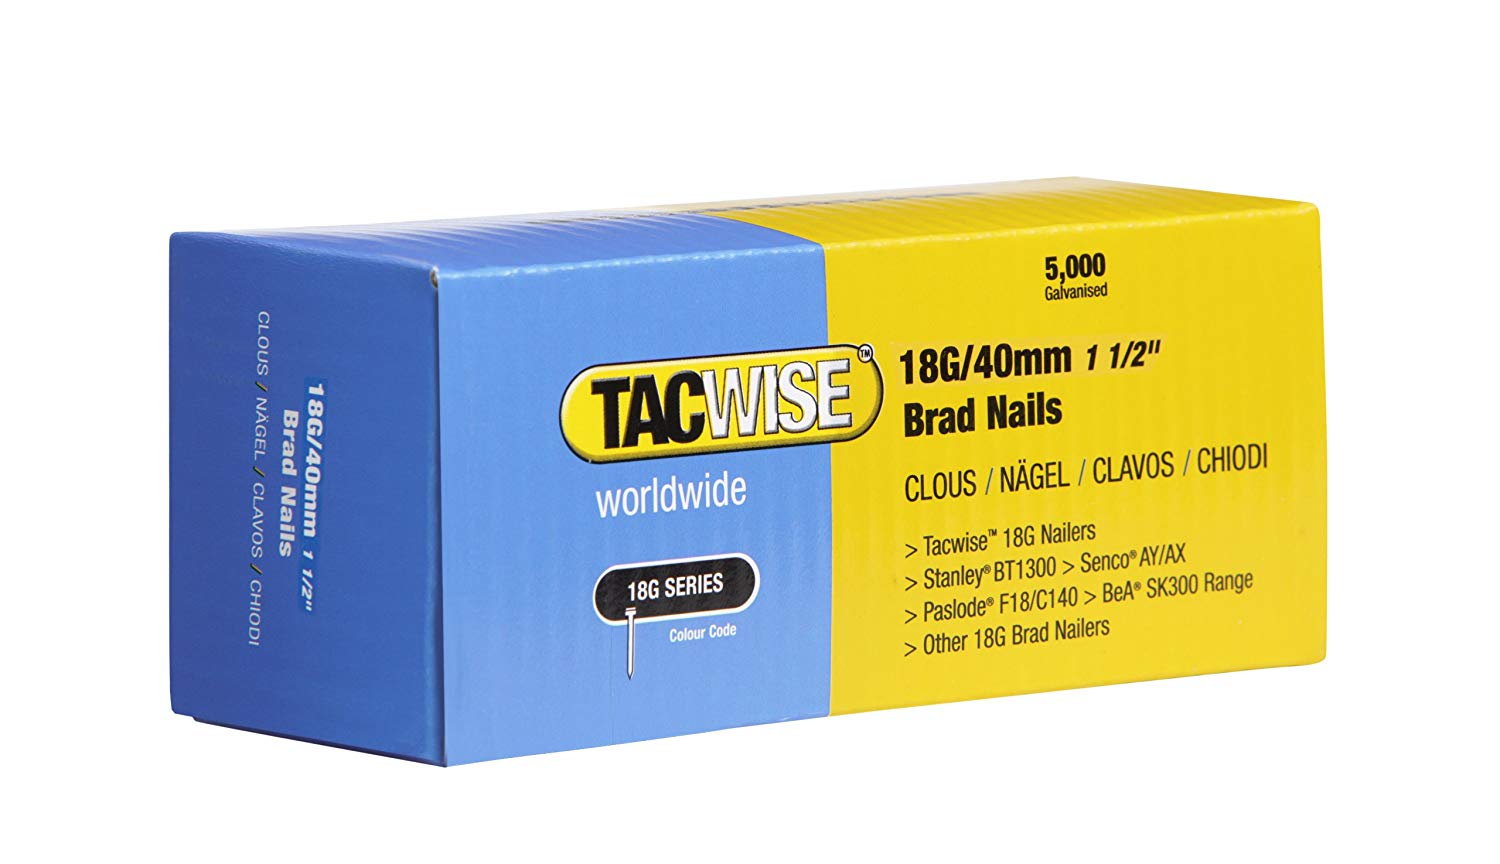 Tacwise 0400 Type 18G / 40 mm Galvanised Brad Nails, Pack of 5,000